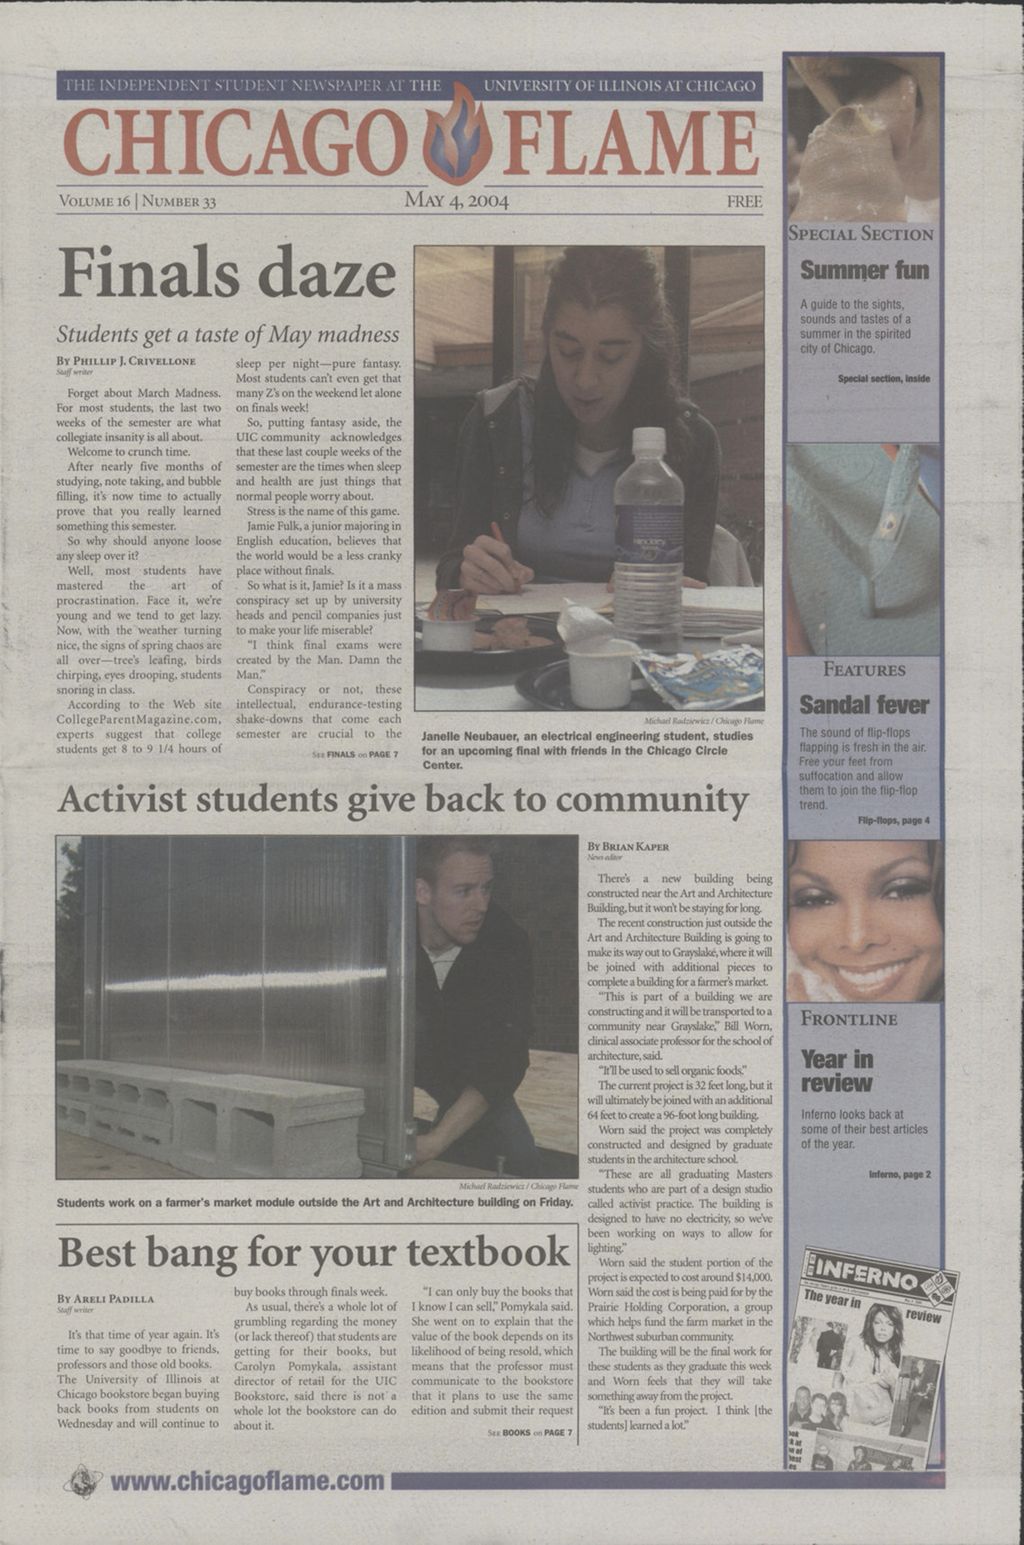 Chicago Flame (May 4, 2004)